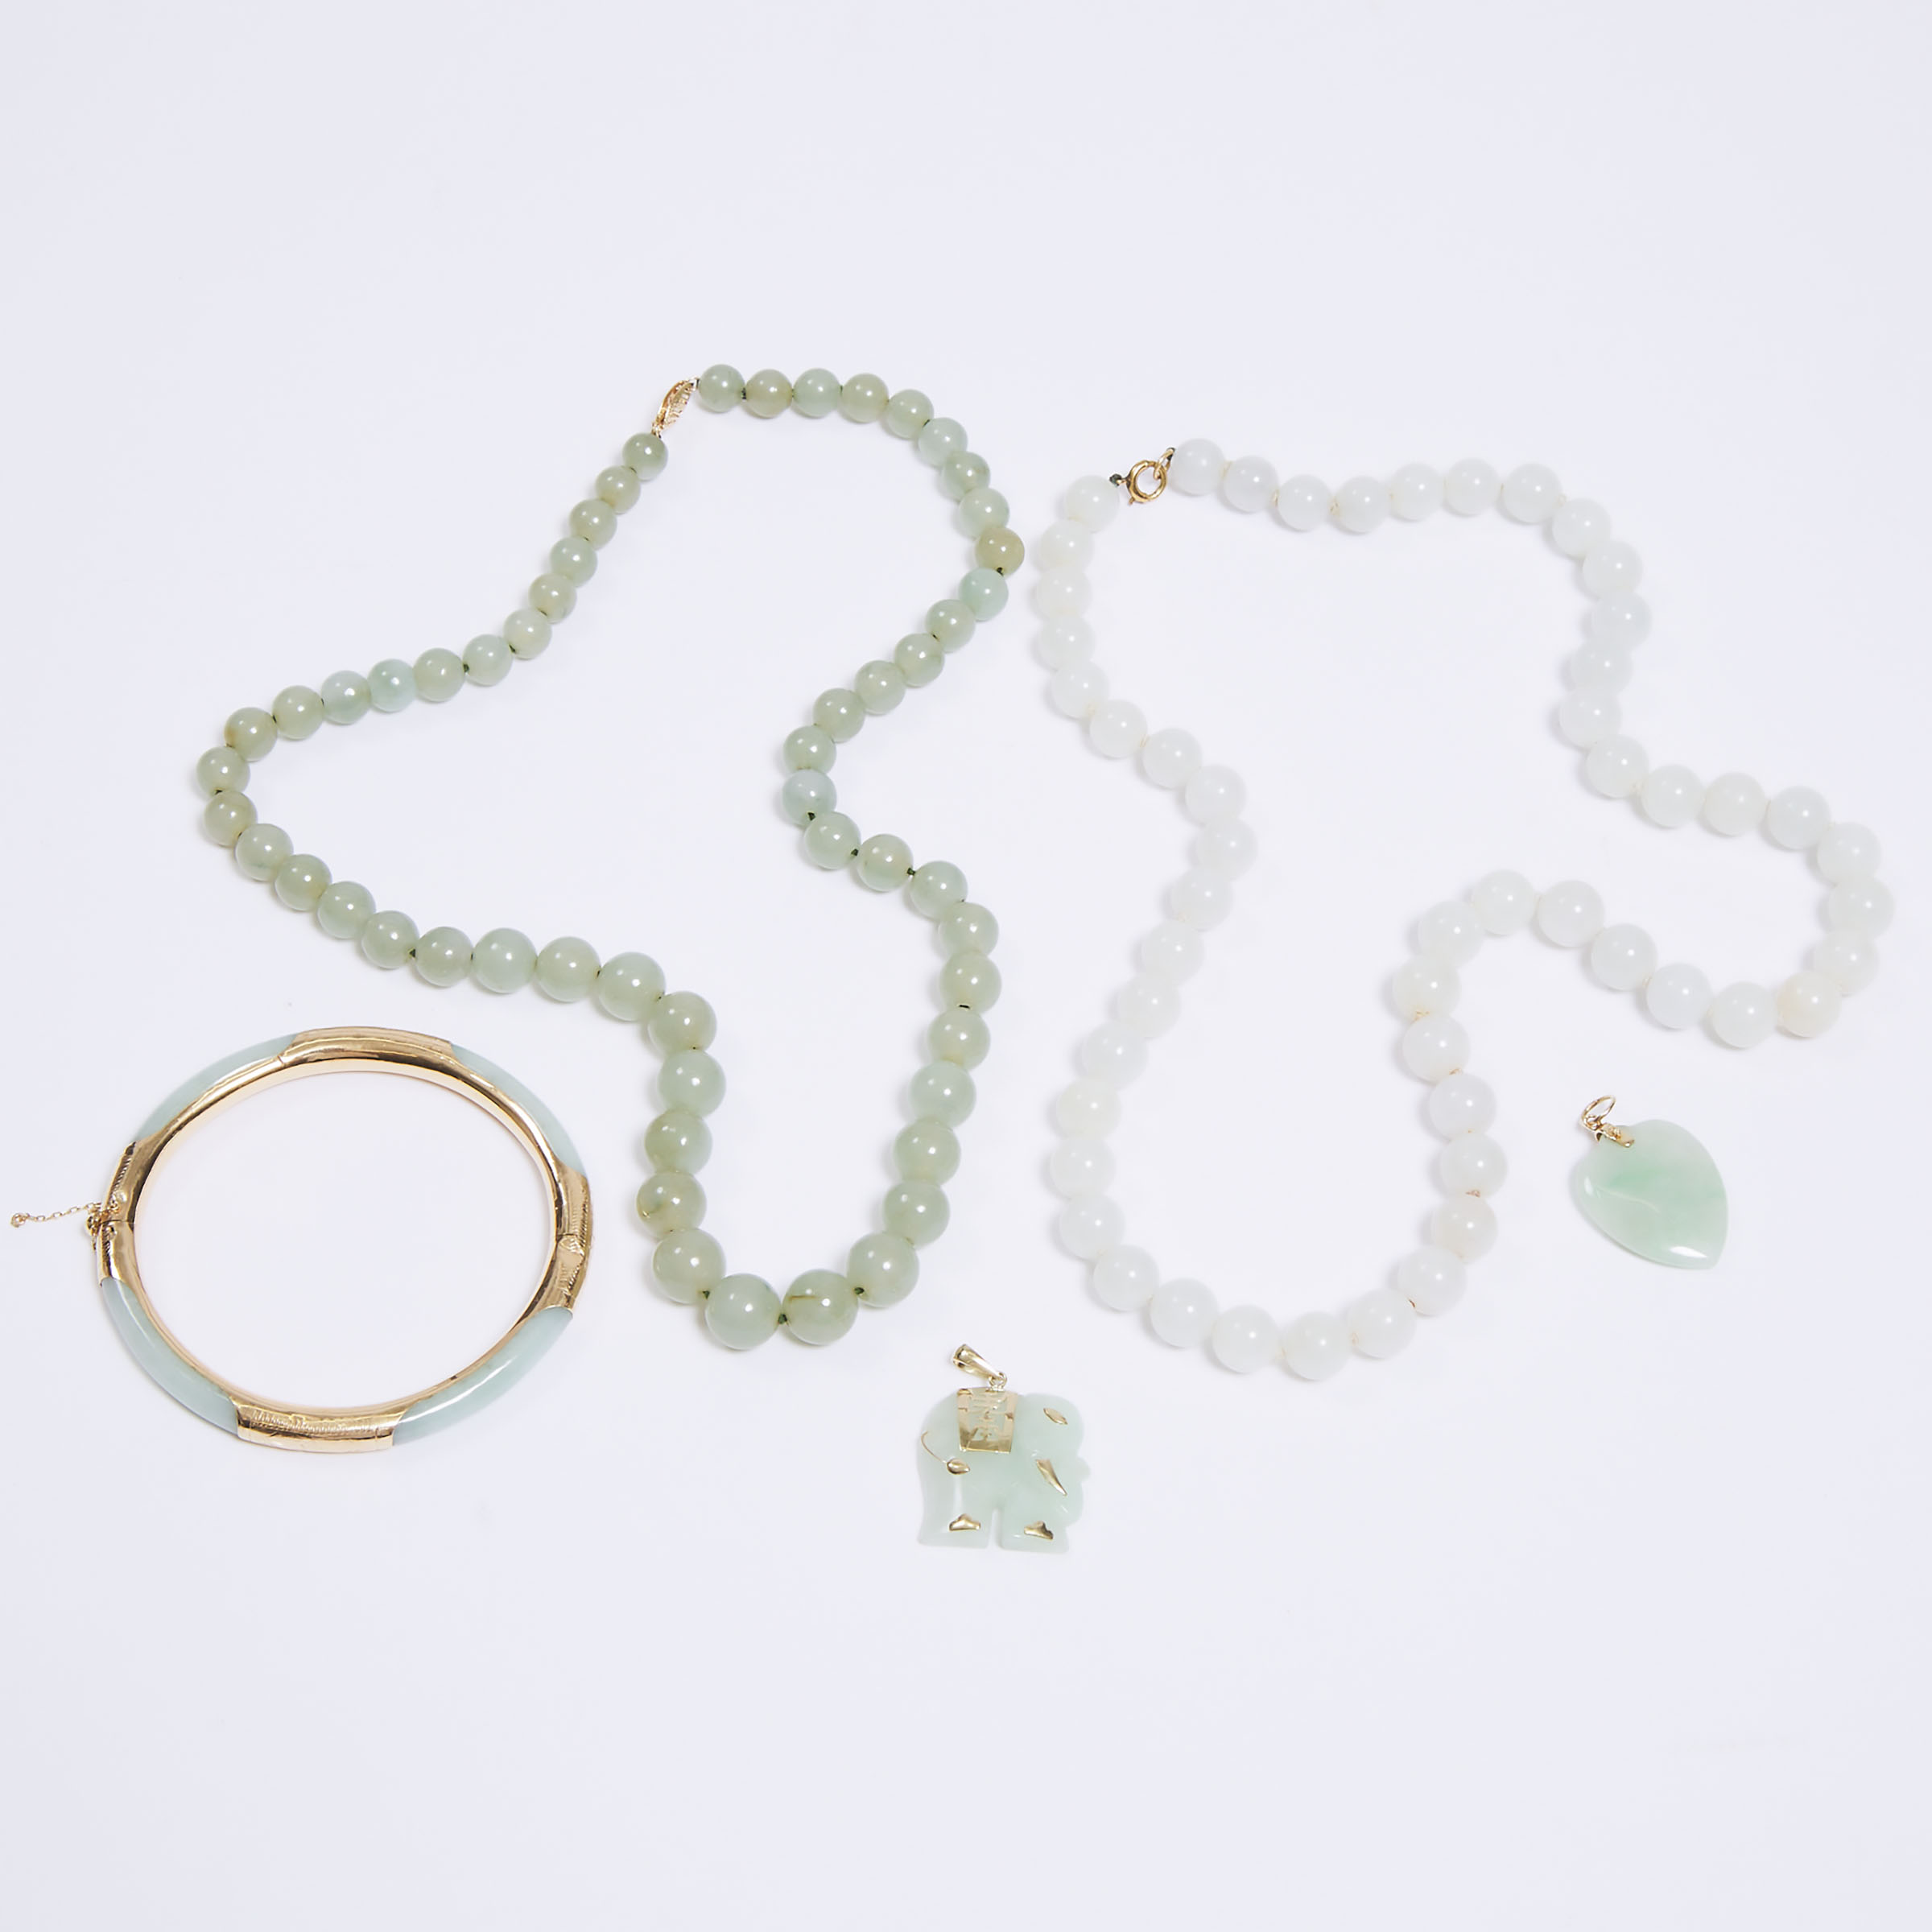 A Group of Five Chinese Gold Mounted Jadeite Jewellery Pieces